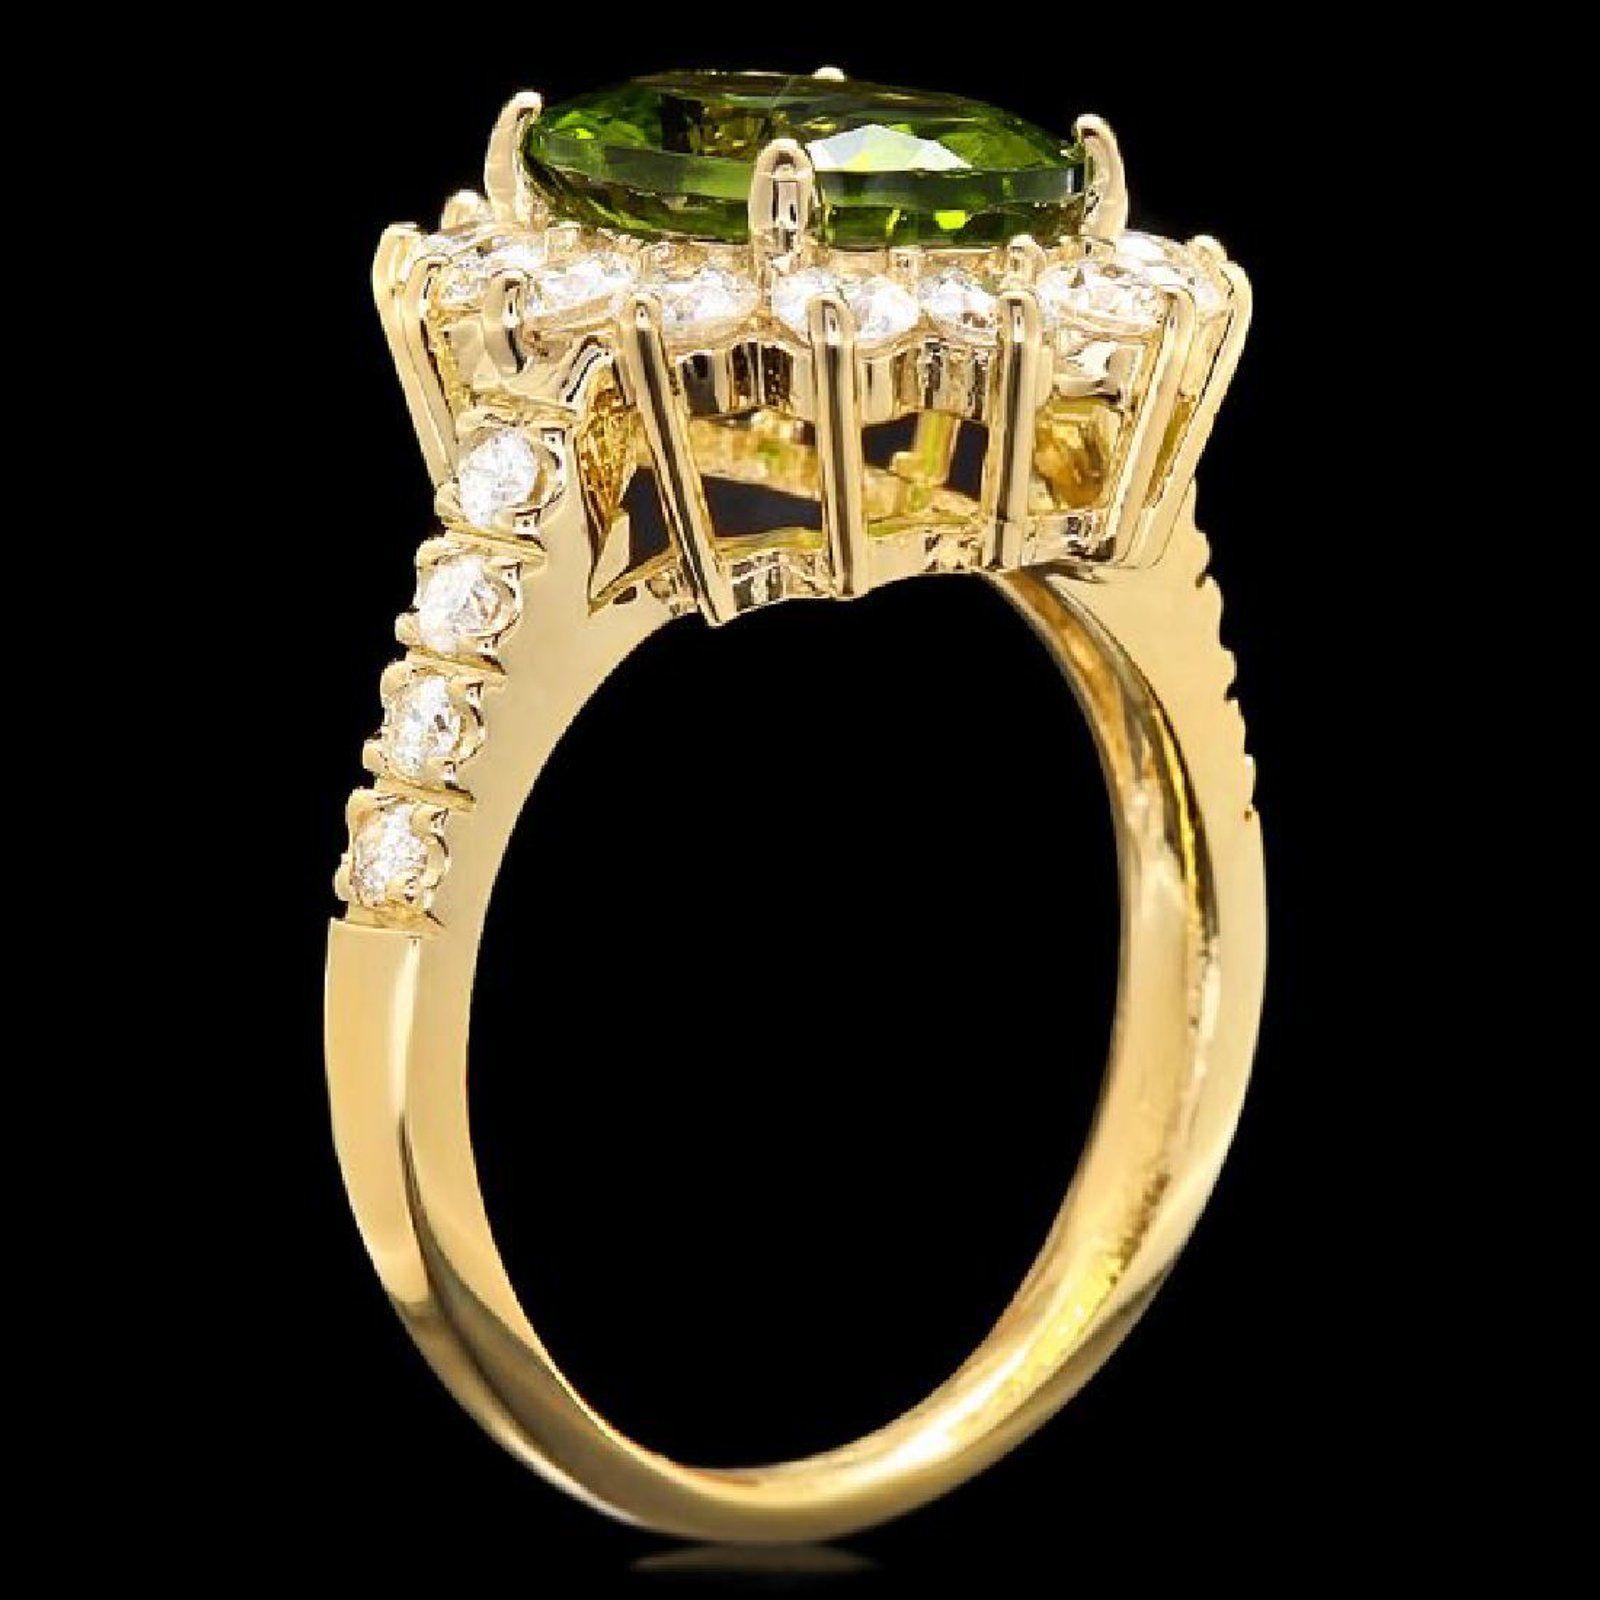 5.15 Carats Impressive Natural Peridot and Diamond 14K Yellow Gold Ring

Total Natural Peridot Weight is: Approx. 4.00 Carats

Peridot Measures: Approx. 11.00 x 9.00mm

Natural Round Diamonds Weight: Approx. 1.15 Carats (color G-H / Clarity